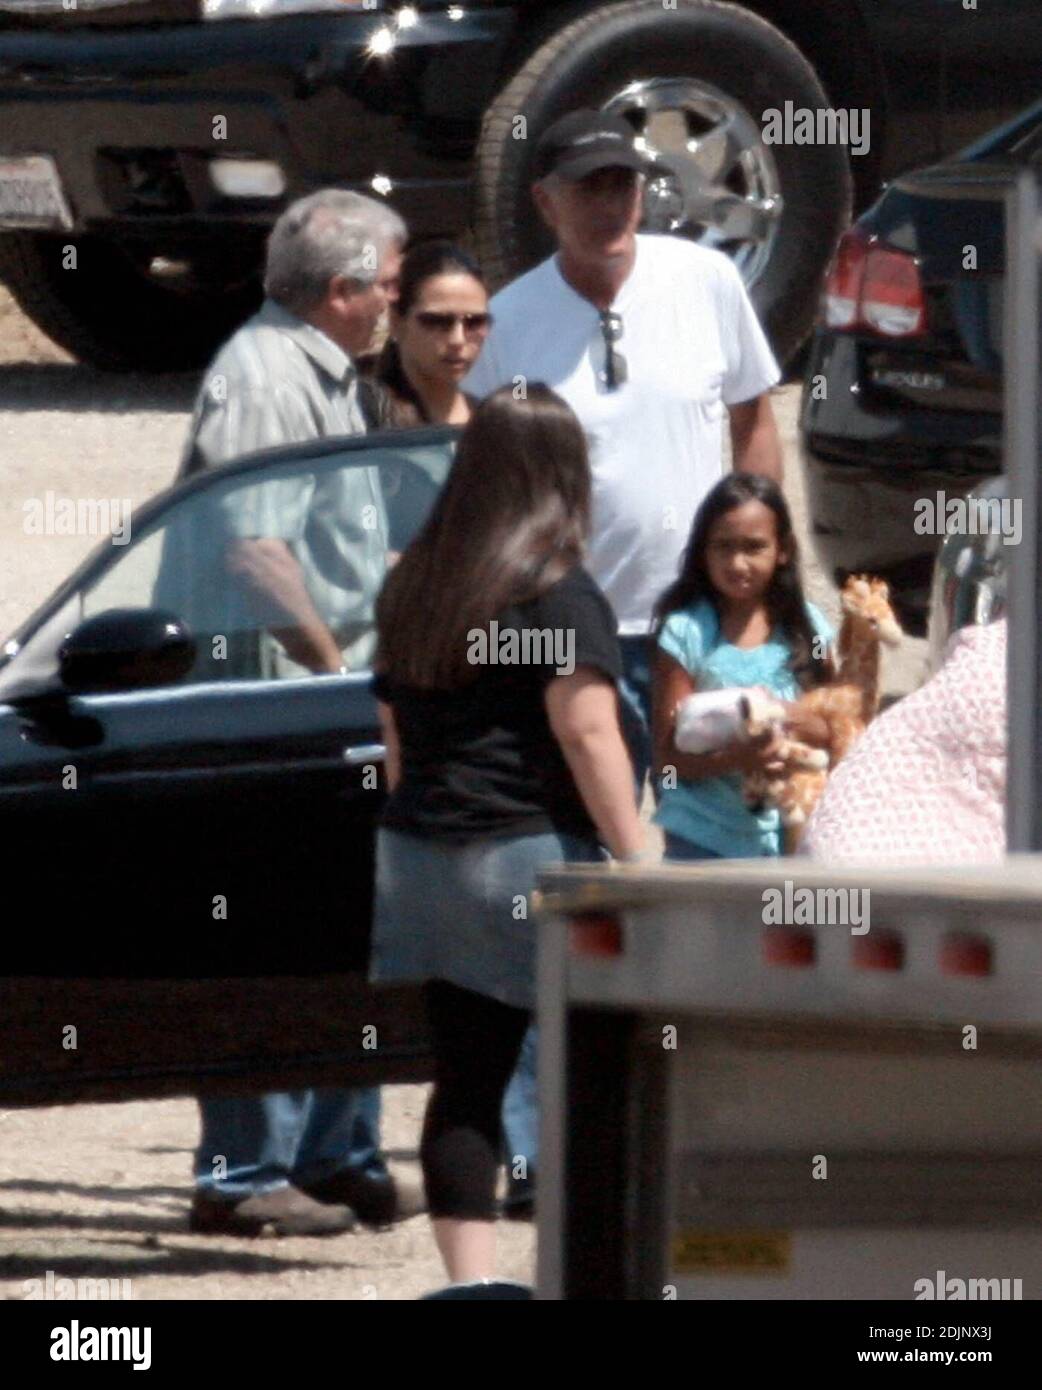 Matt Damon brings his family along to the set of Oceans Thirteen filming in Los Angeles, Ca. including his 2 month old daughter Isabella. He had a broad smile on his face when he helped lift the newborn out of the car. He also spent time with his wife Luciana's daughter Alexa, holding her hand as he showed her around the base camp. 8/24/06 Stock Photo